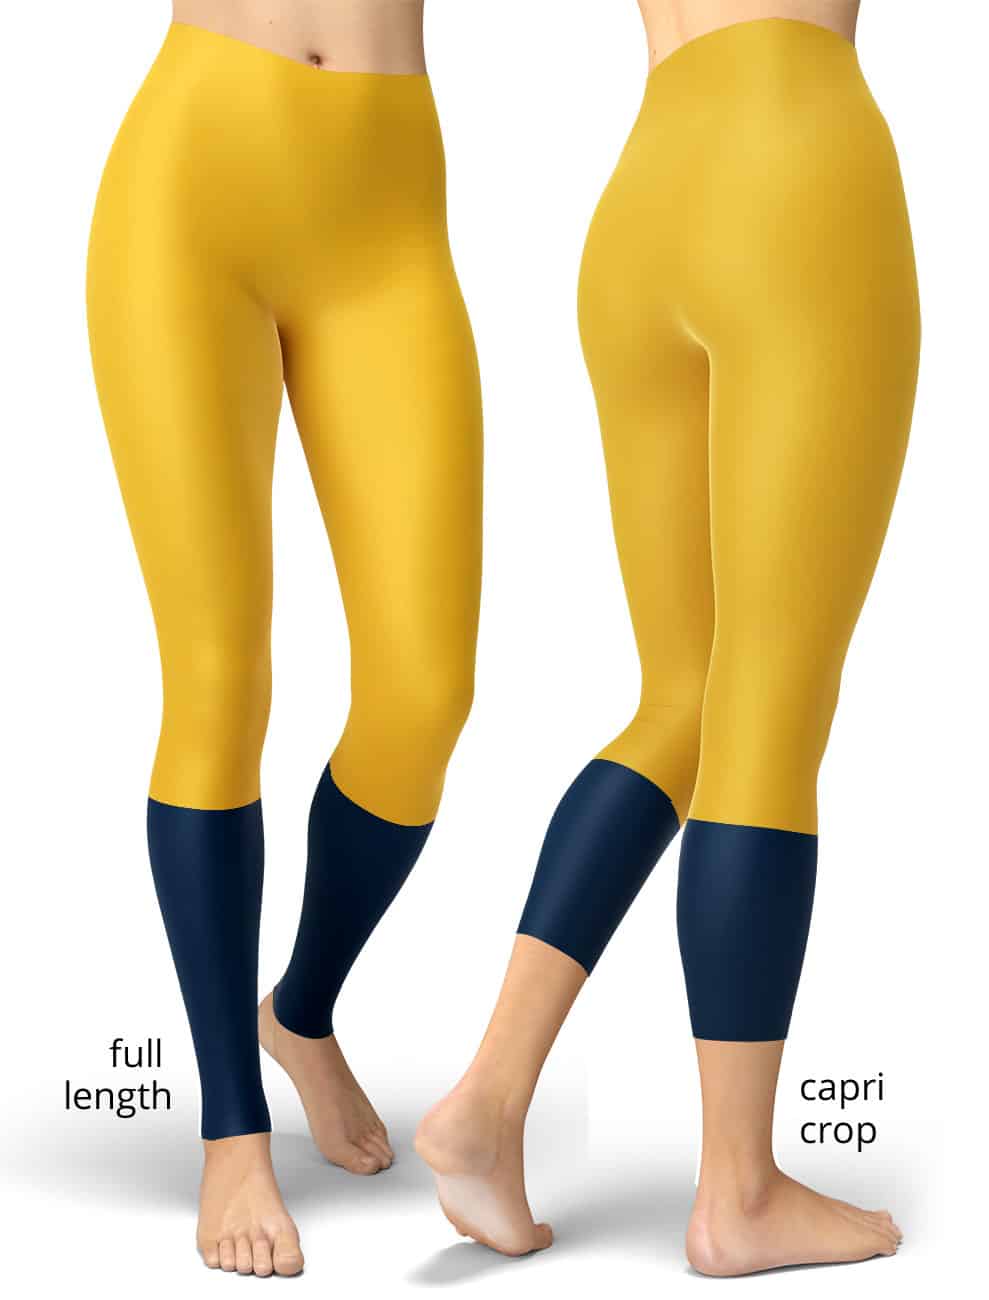 In Christian circles, the leggings debate has been raging with